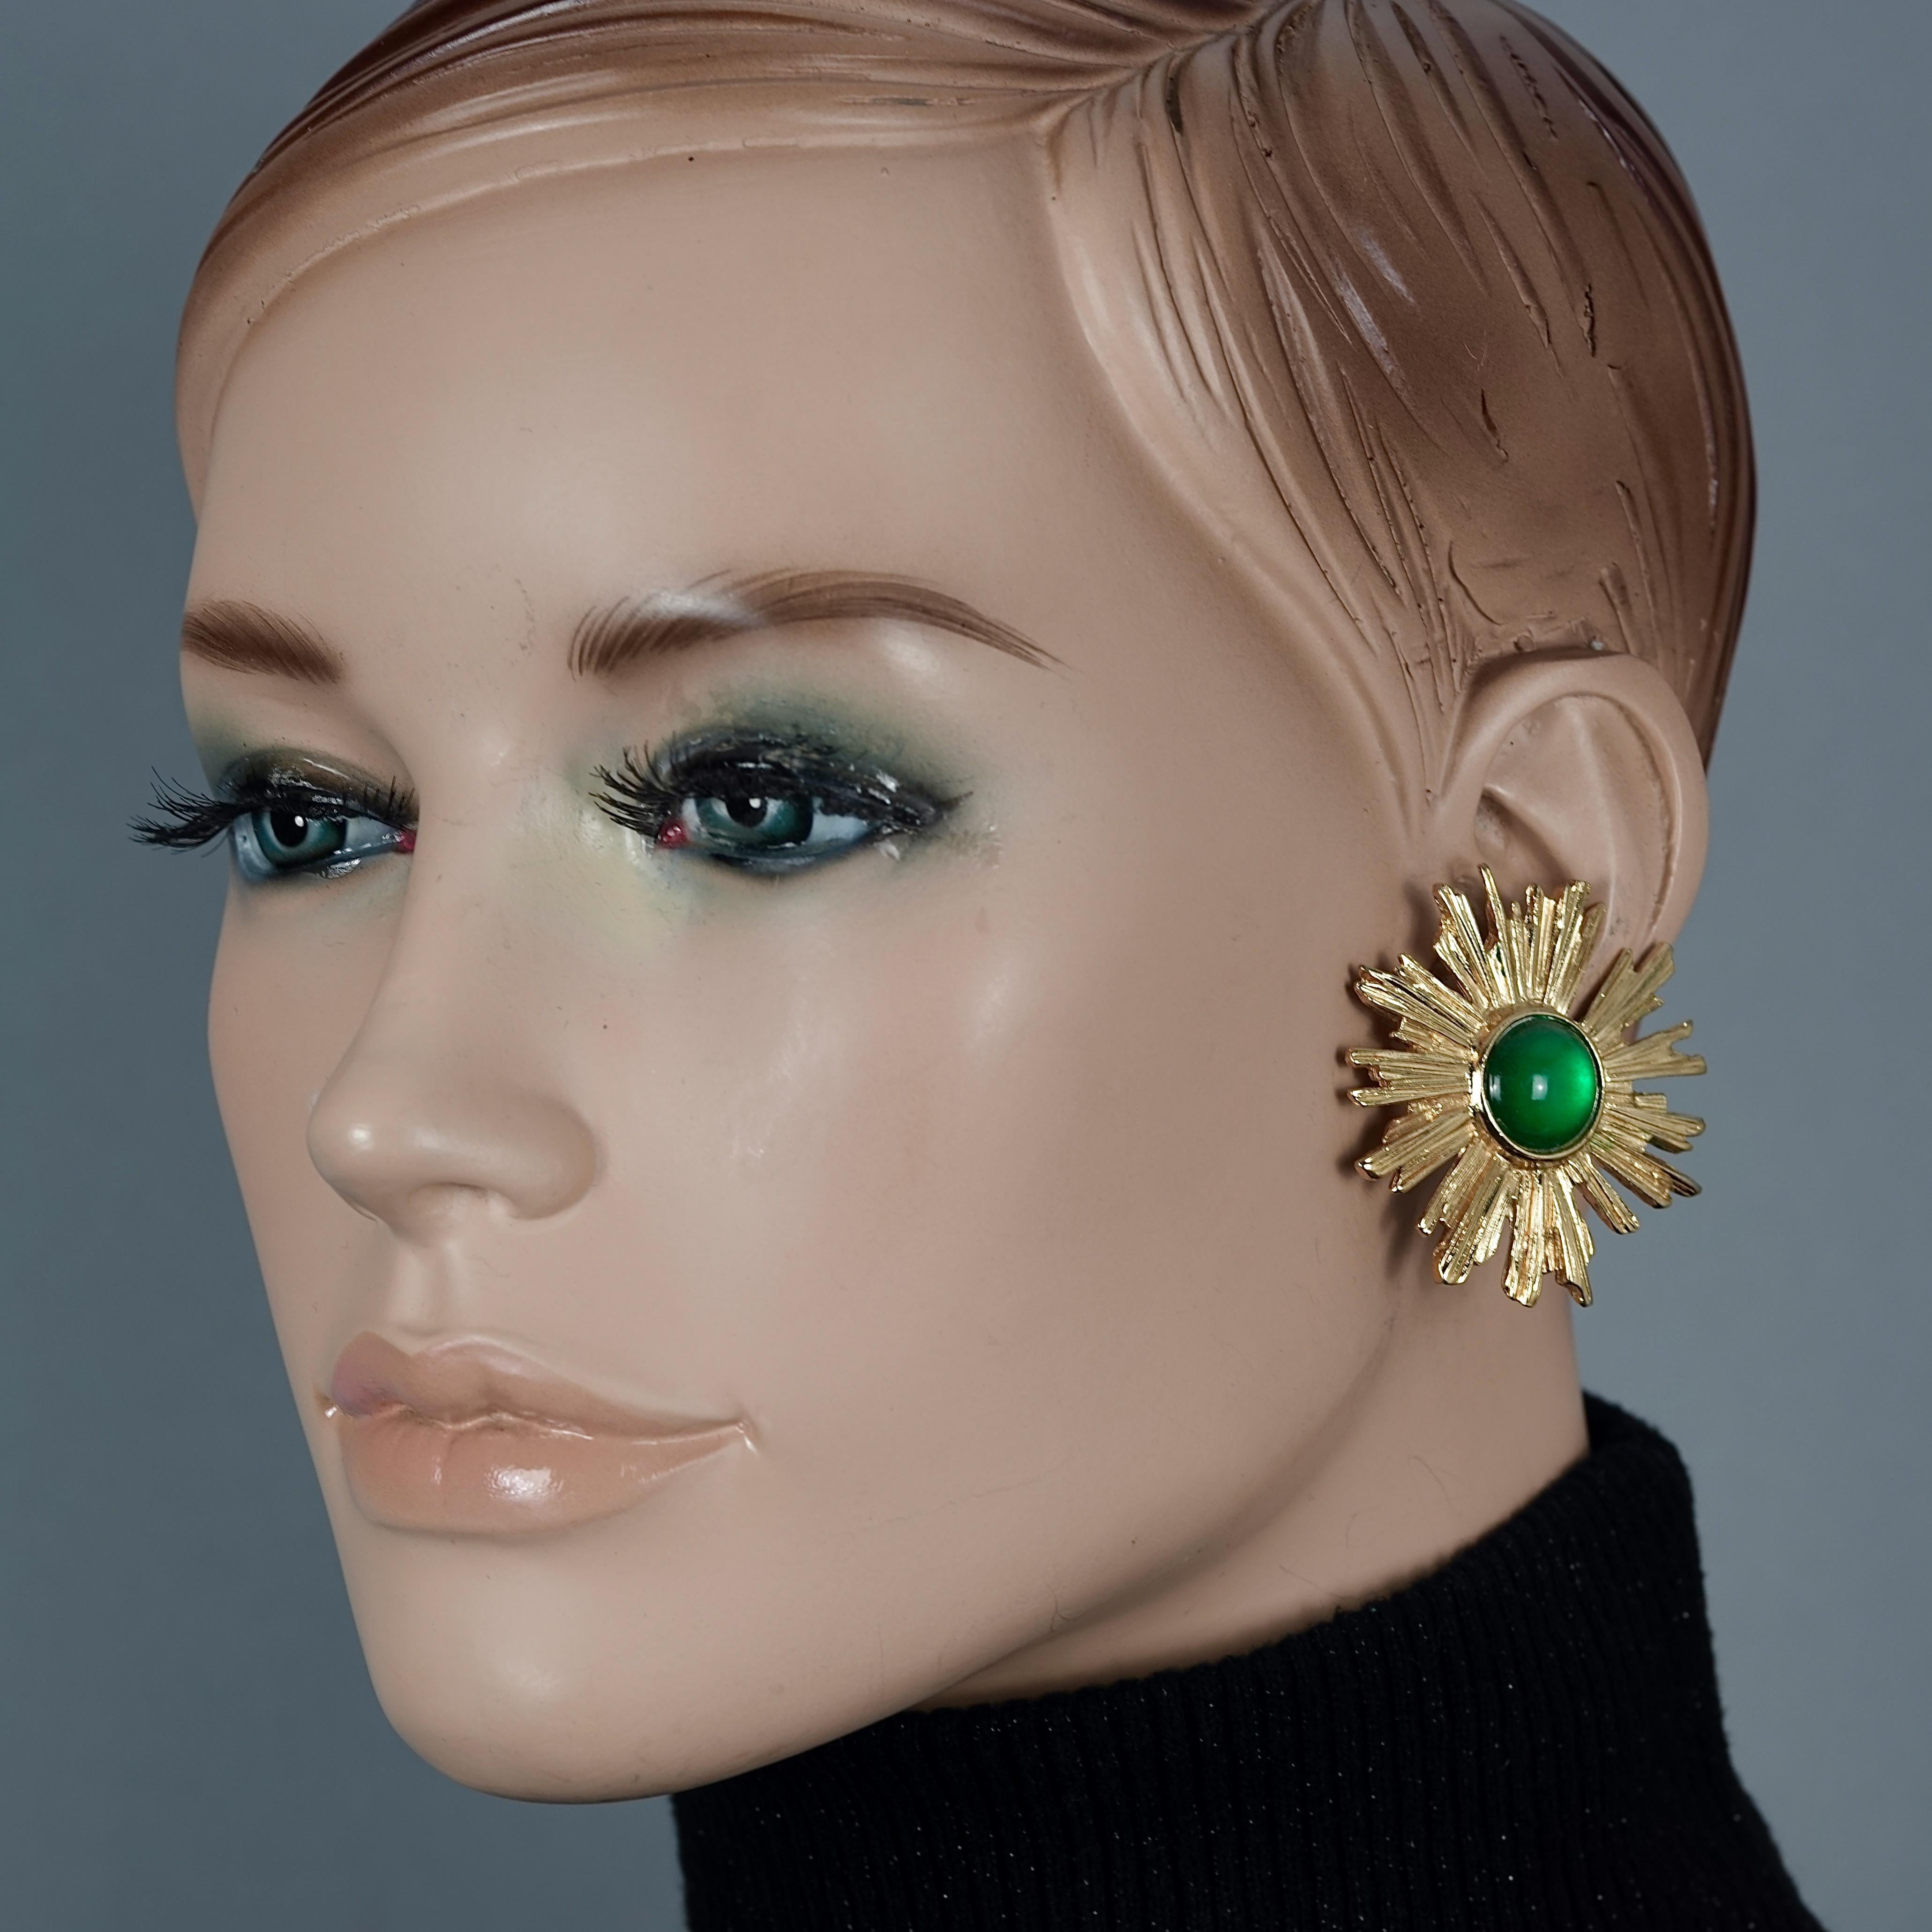 Vintage YVES SAINT LAURENT Ysl Sunburst Emerald Stone Earrings

Measurements:
Height: 1.81 inches (4.6 cm)
Width: 1.73 inches (4.4 cm)
Weight: 18 grams

Features:
- 100% Authentic YVES SAINT LAURENT.
- Fax emerald stone cabochon at the centre with